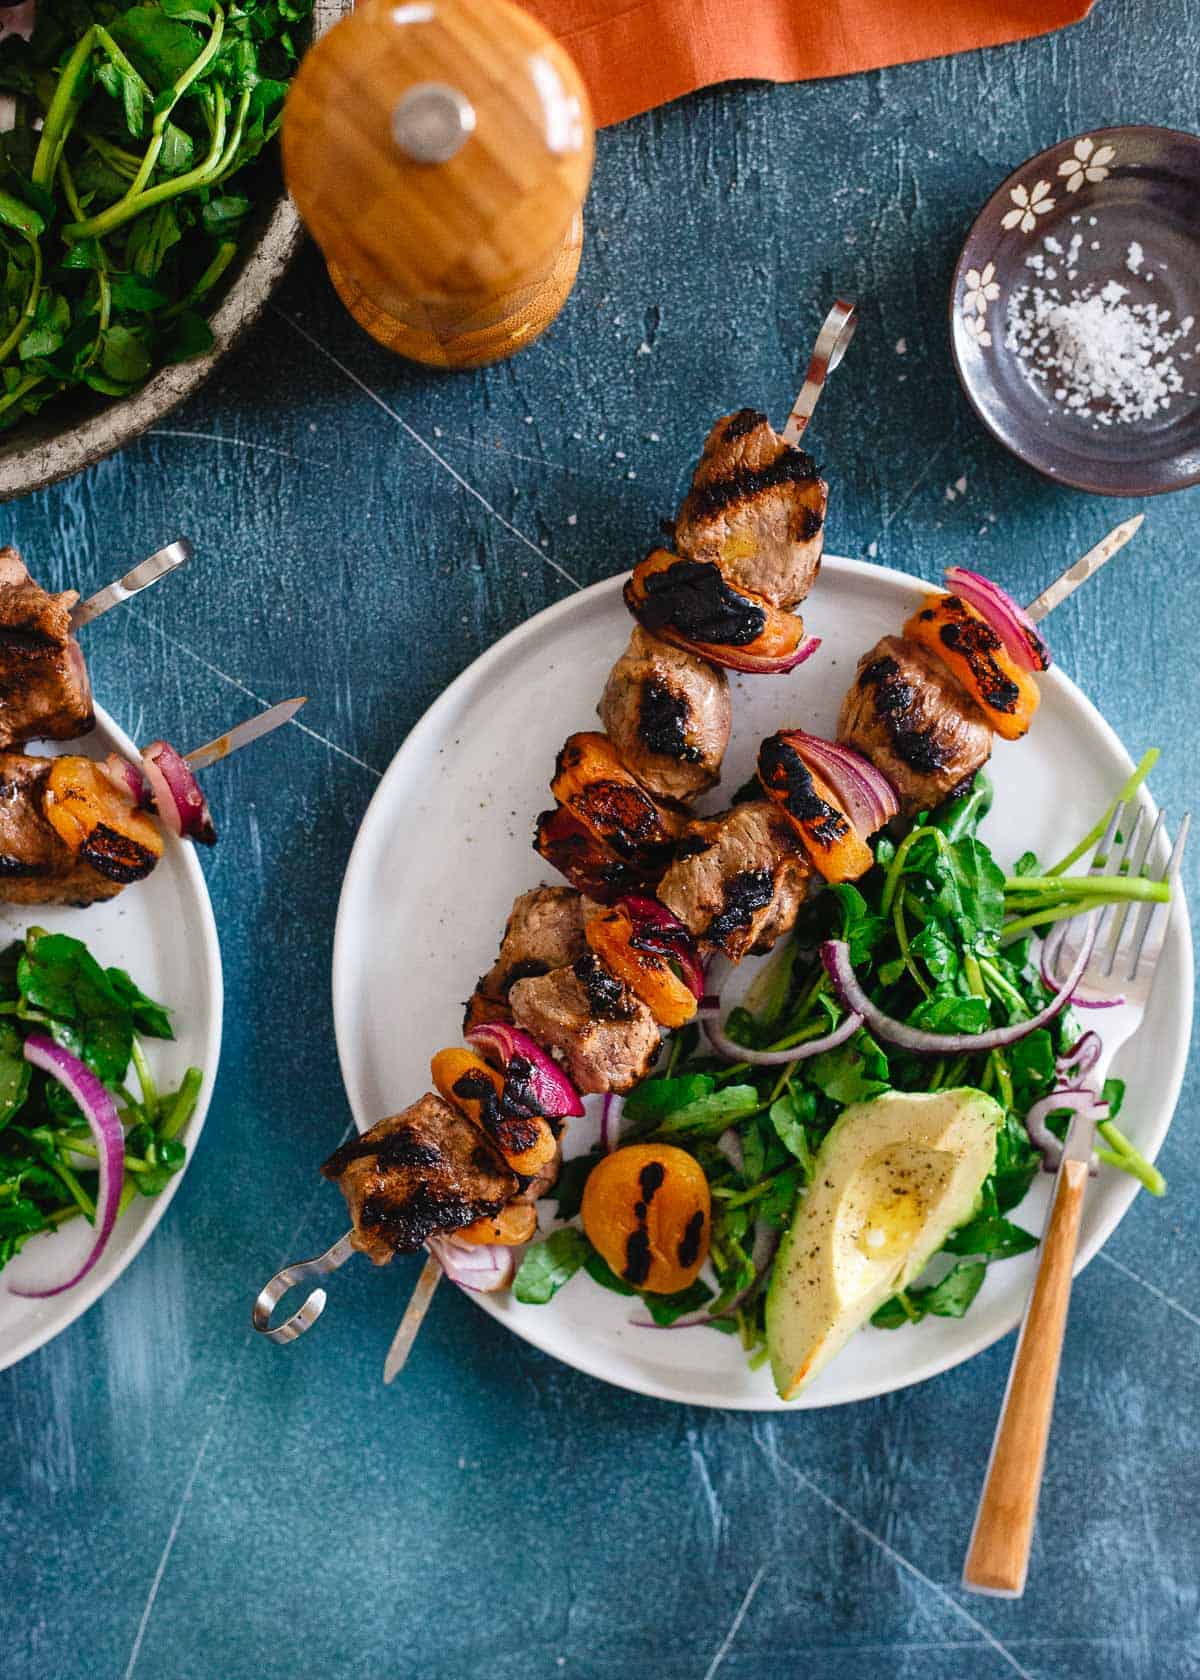 A plate of succulent grilled skewers with vegetables and a side salad, ready for a flavorful meal.